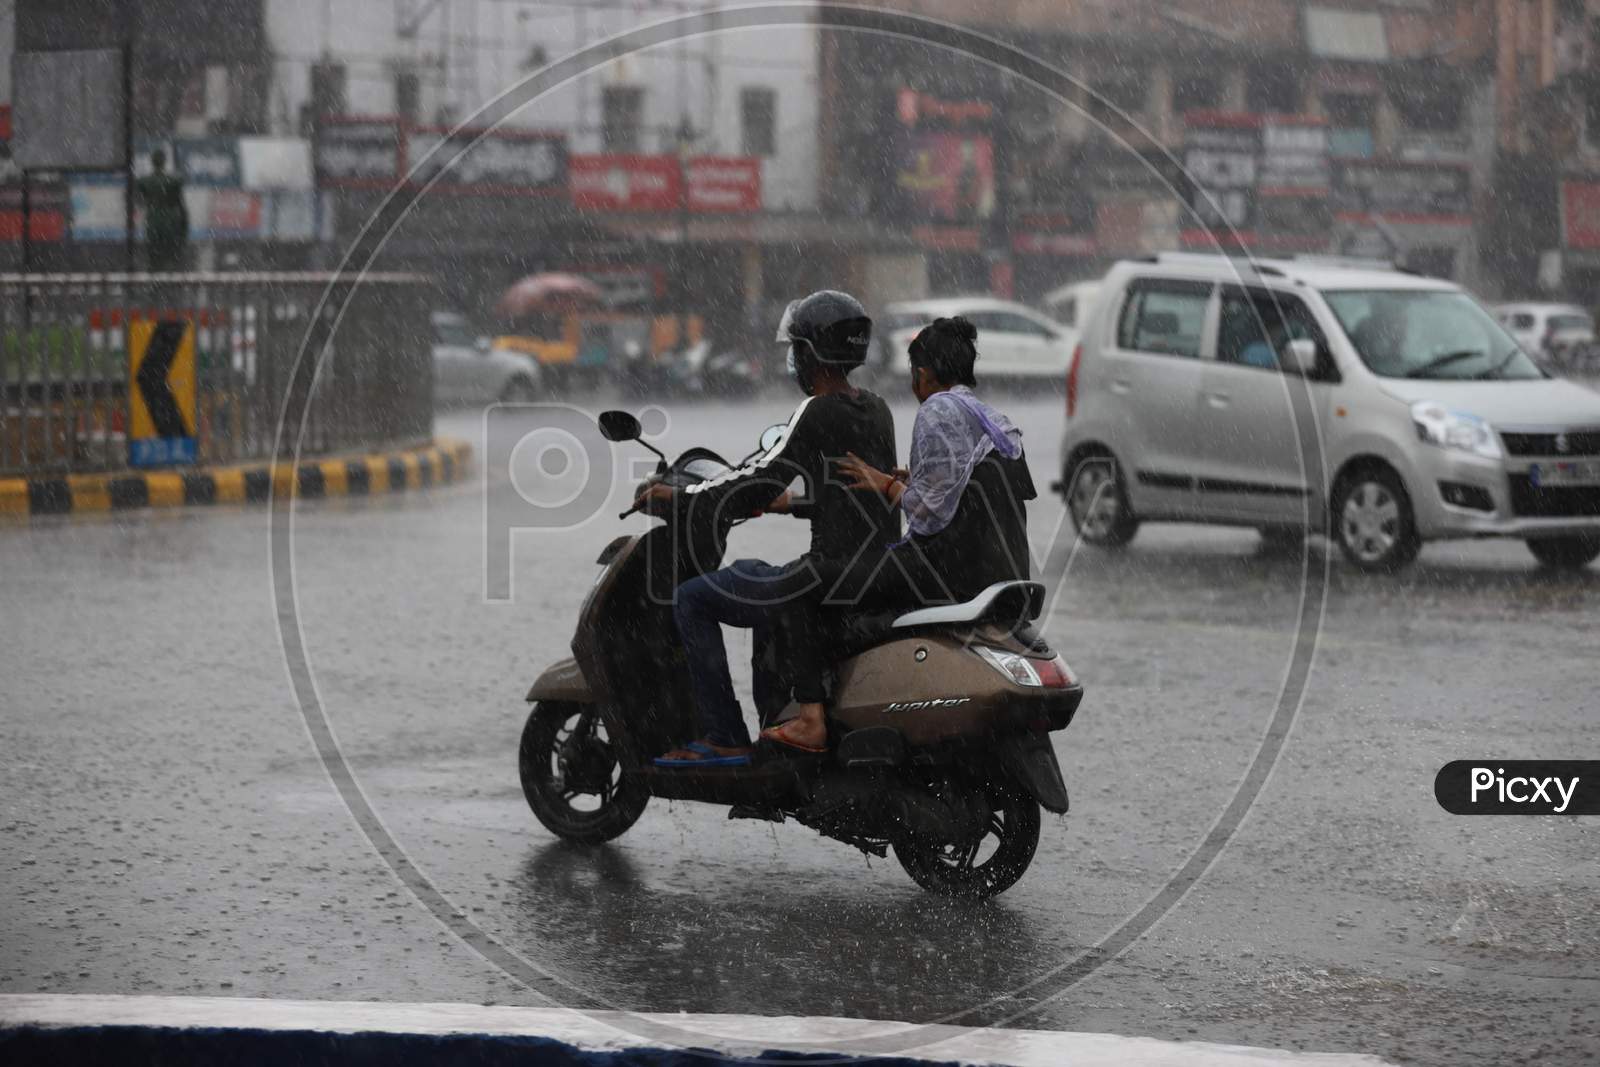 A couple ride a Scooty On The Road During Heavy Monsoon Rain In Prayagraj, June 25, 2020.